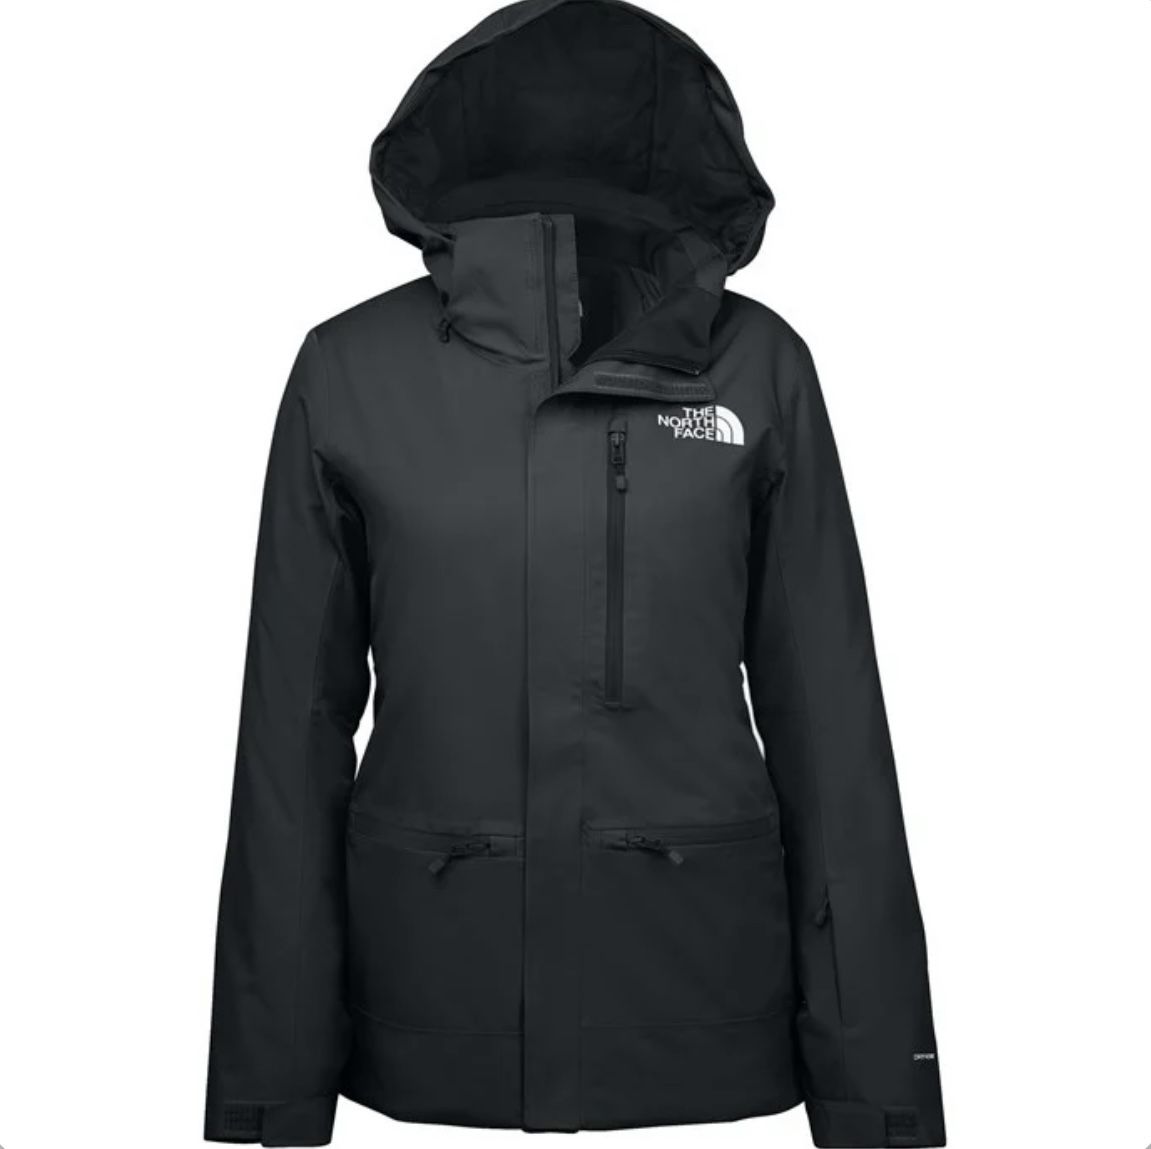 New women’s The North Face Gatekeeper Insulated Ski Jacket